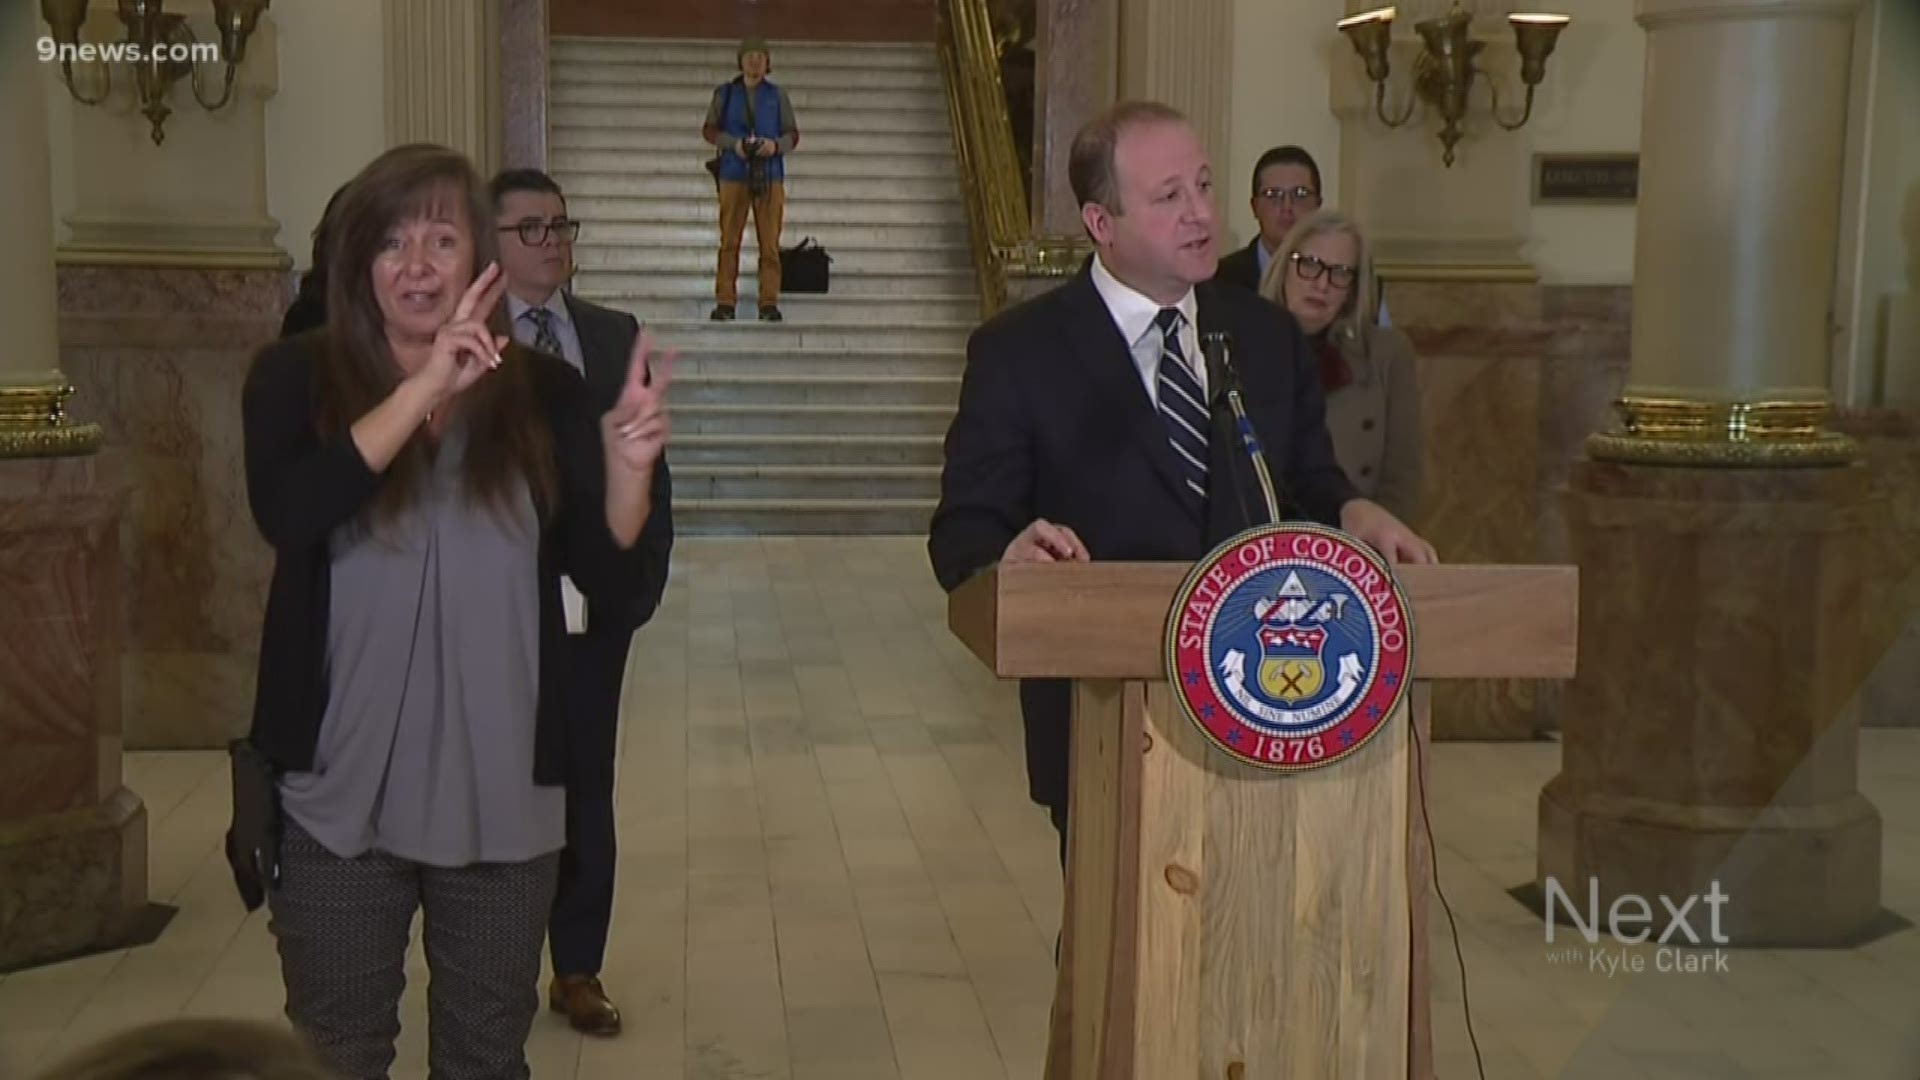 From a news conference on Friday, it appeared that Polis was waiting to see if Coloradans followed guidelines he put into place earlier in the week.